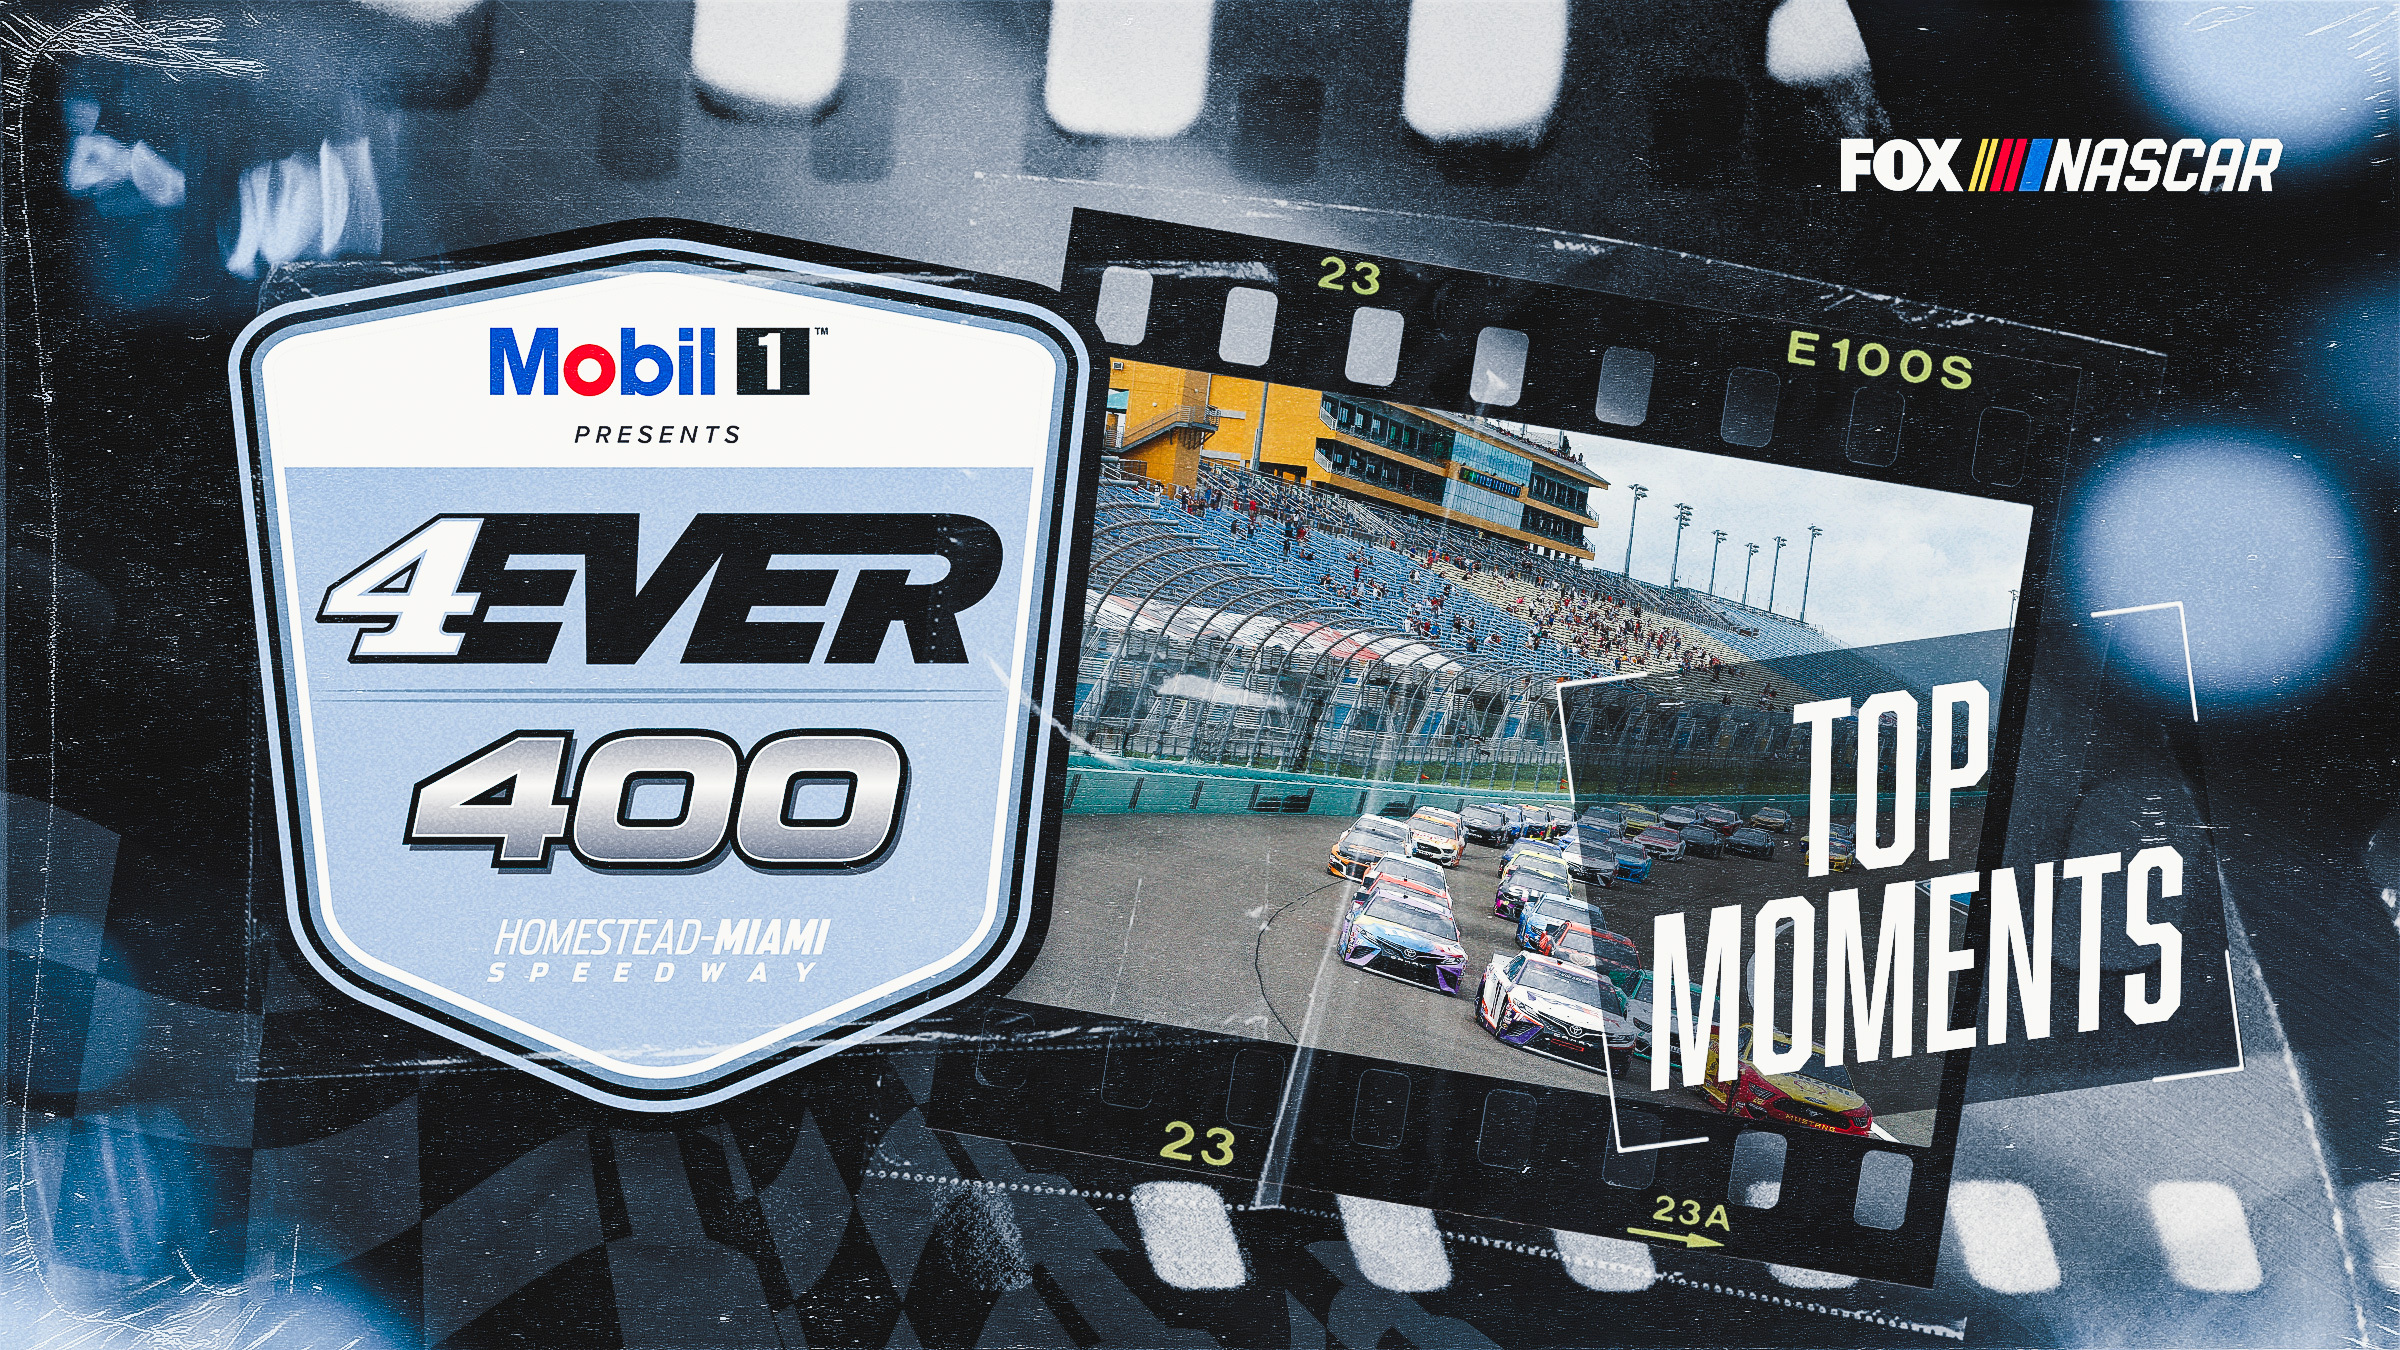 4EVER 400 live updates: Top moments from Homestead-Miami Speedway